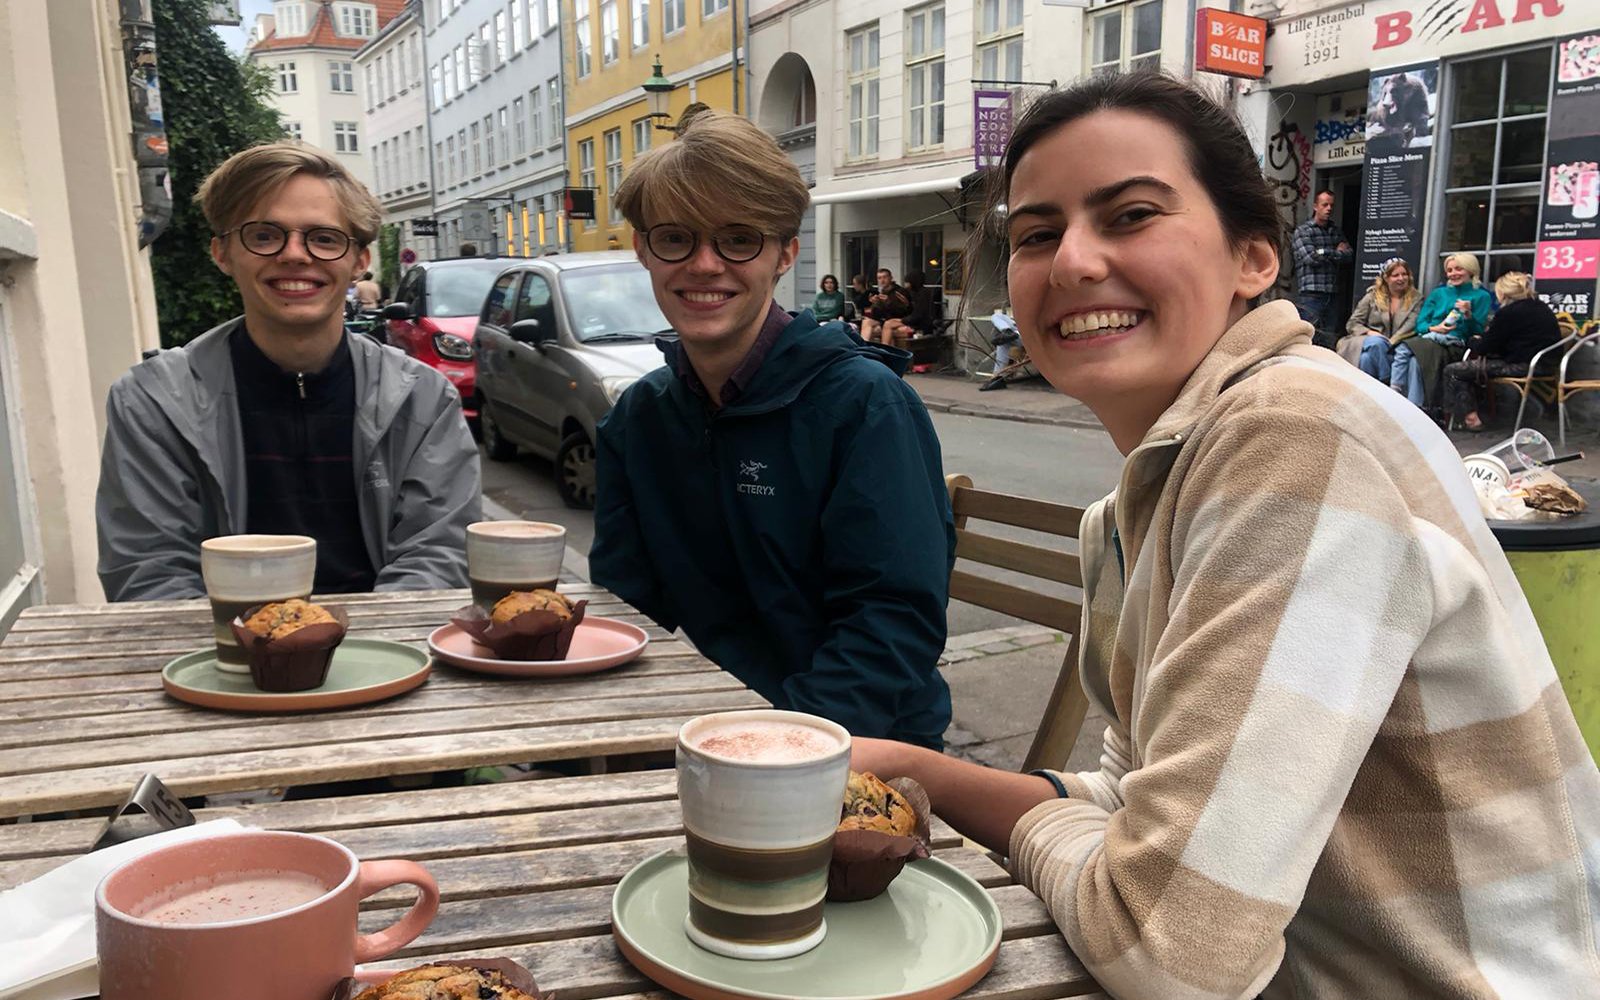 Three students smiling at outdoor table in street downtown, each with a muffin and cup of coffee from a cafe